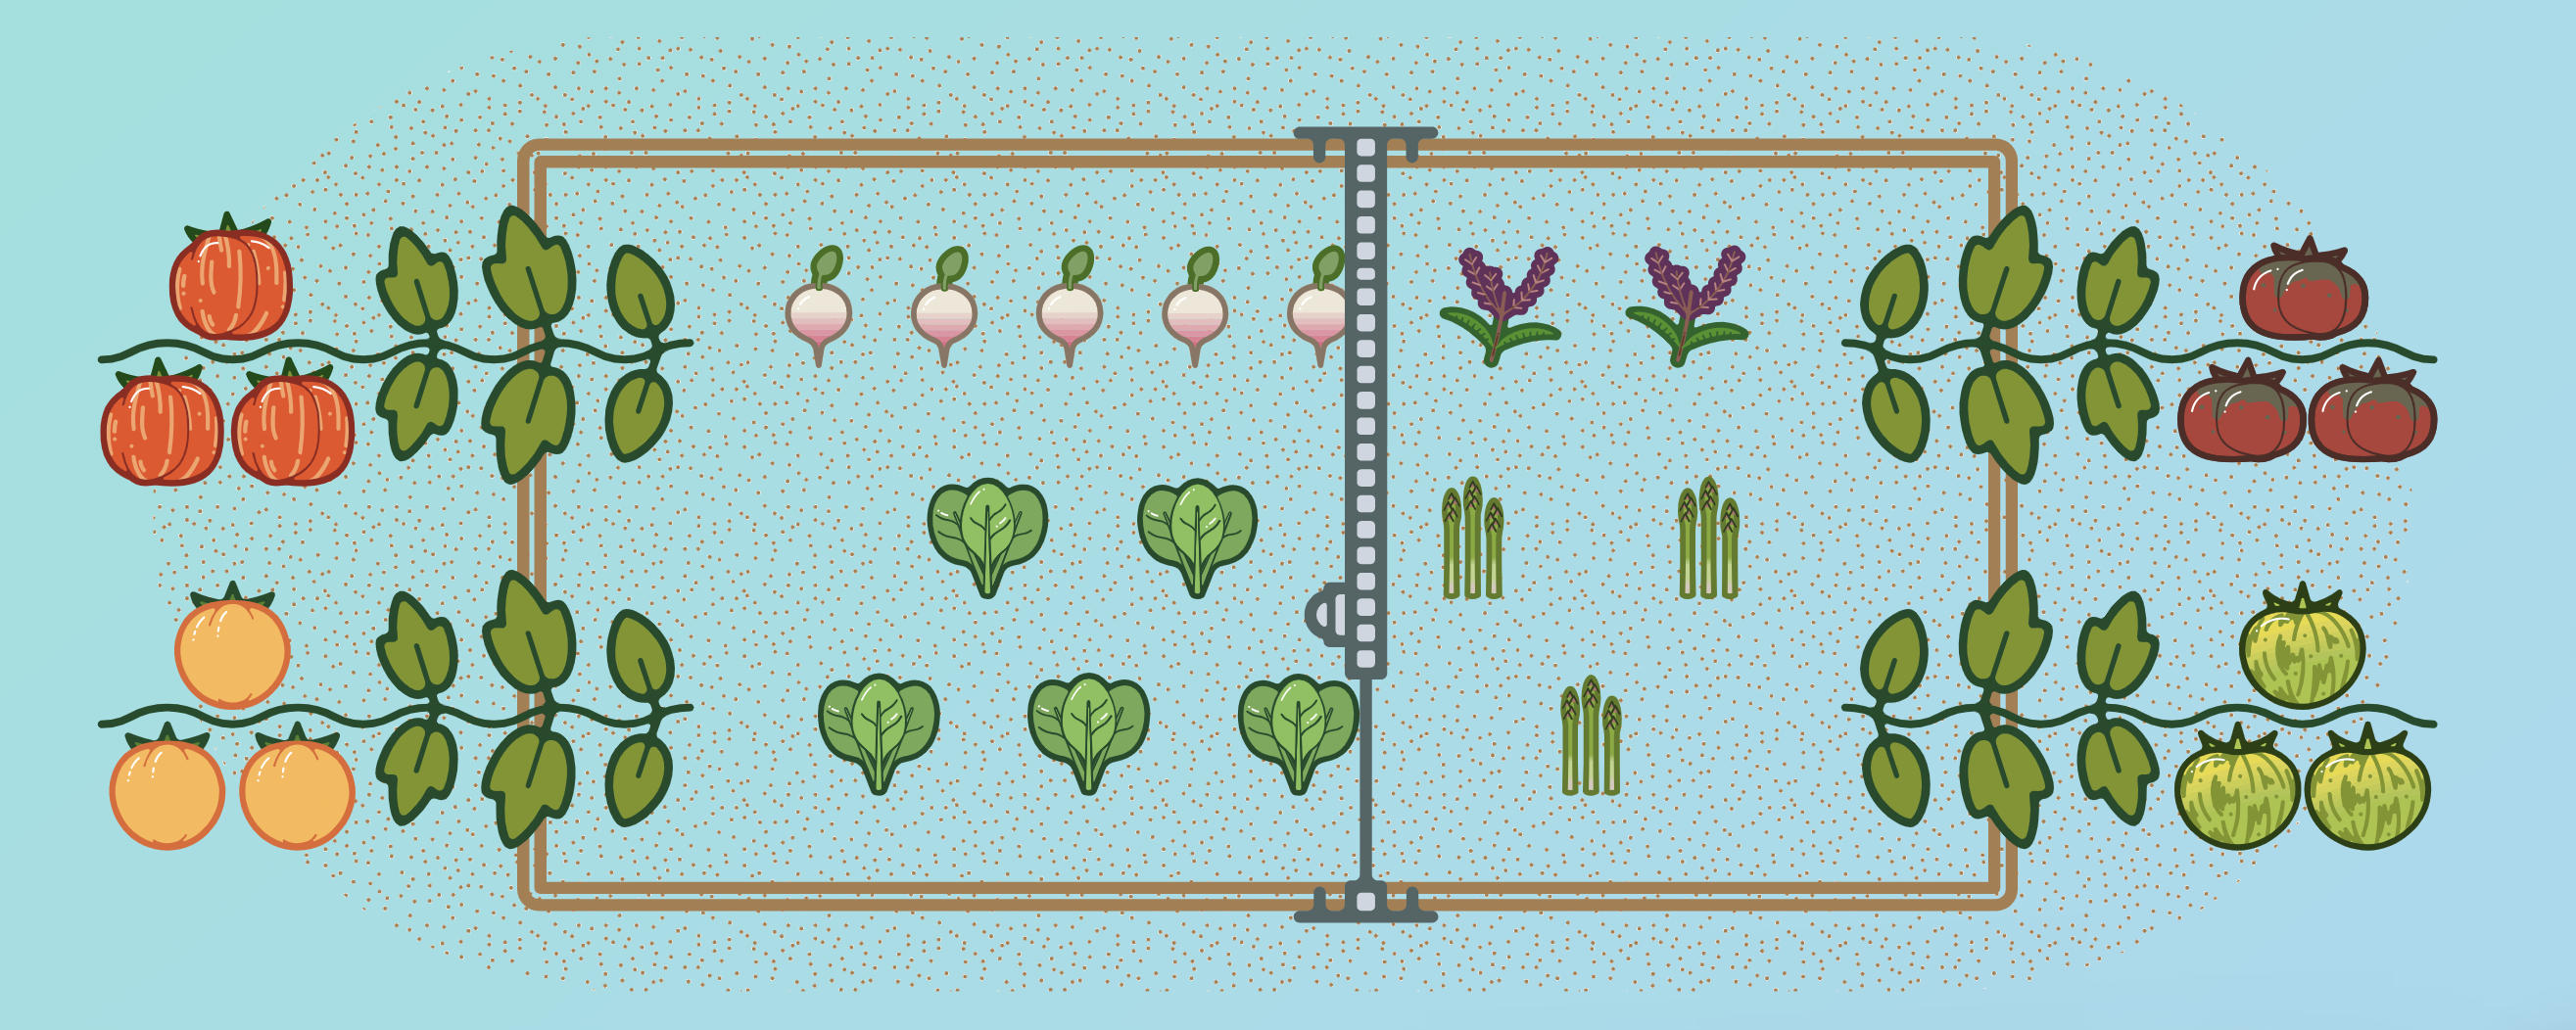 illustration of farmbot with vines at the ends of the bed